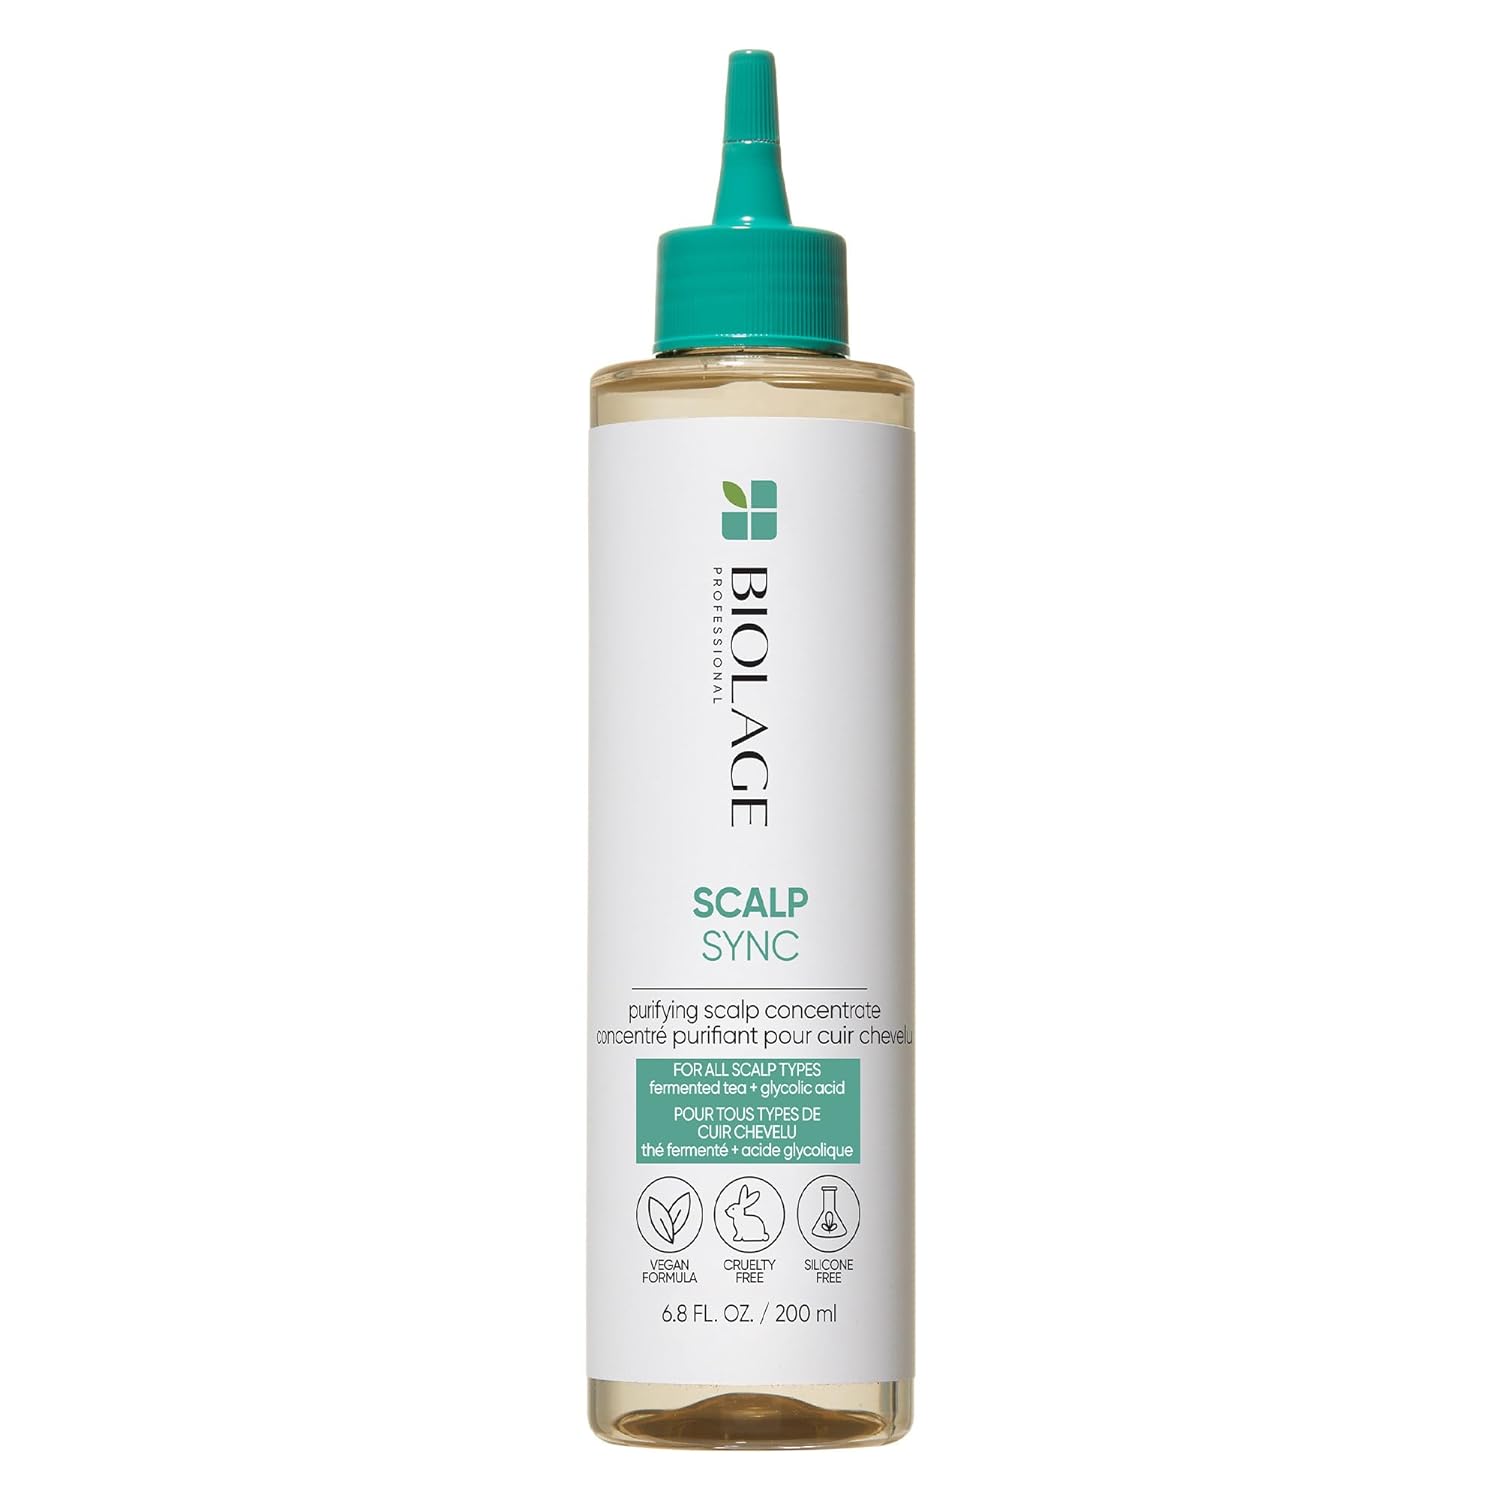 Biolage Scalp Sync Purifying Scalp Concentrate | Exfoliates & Clarifies Scalp Buildup | For All Scalp Concerns | Paraben & Silicone-Free | Vegan | Cruelty Free | Balancing Scalp Treatment